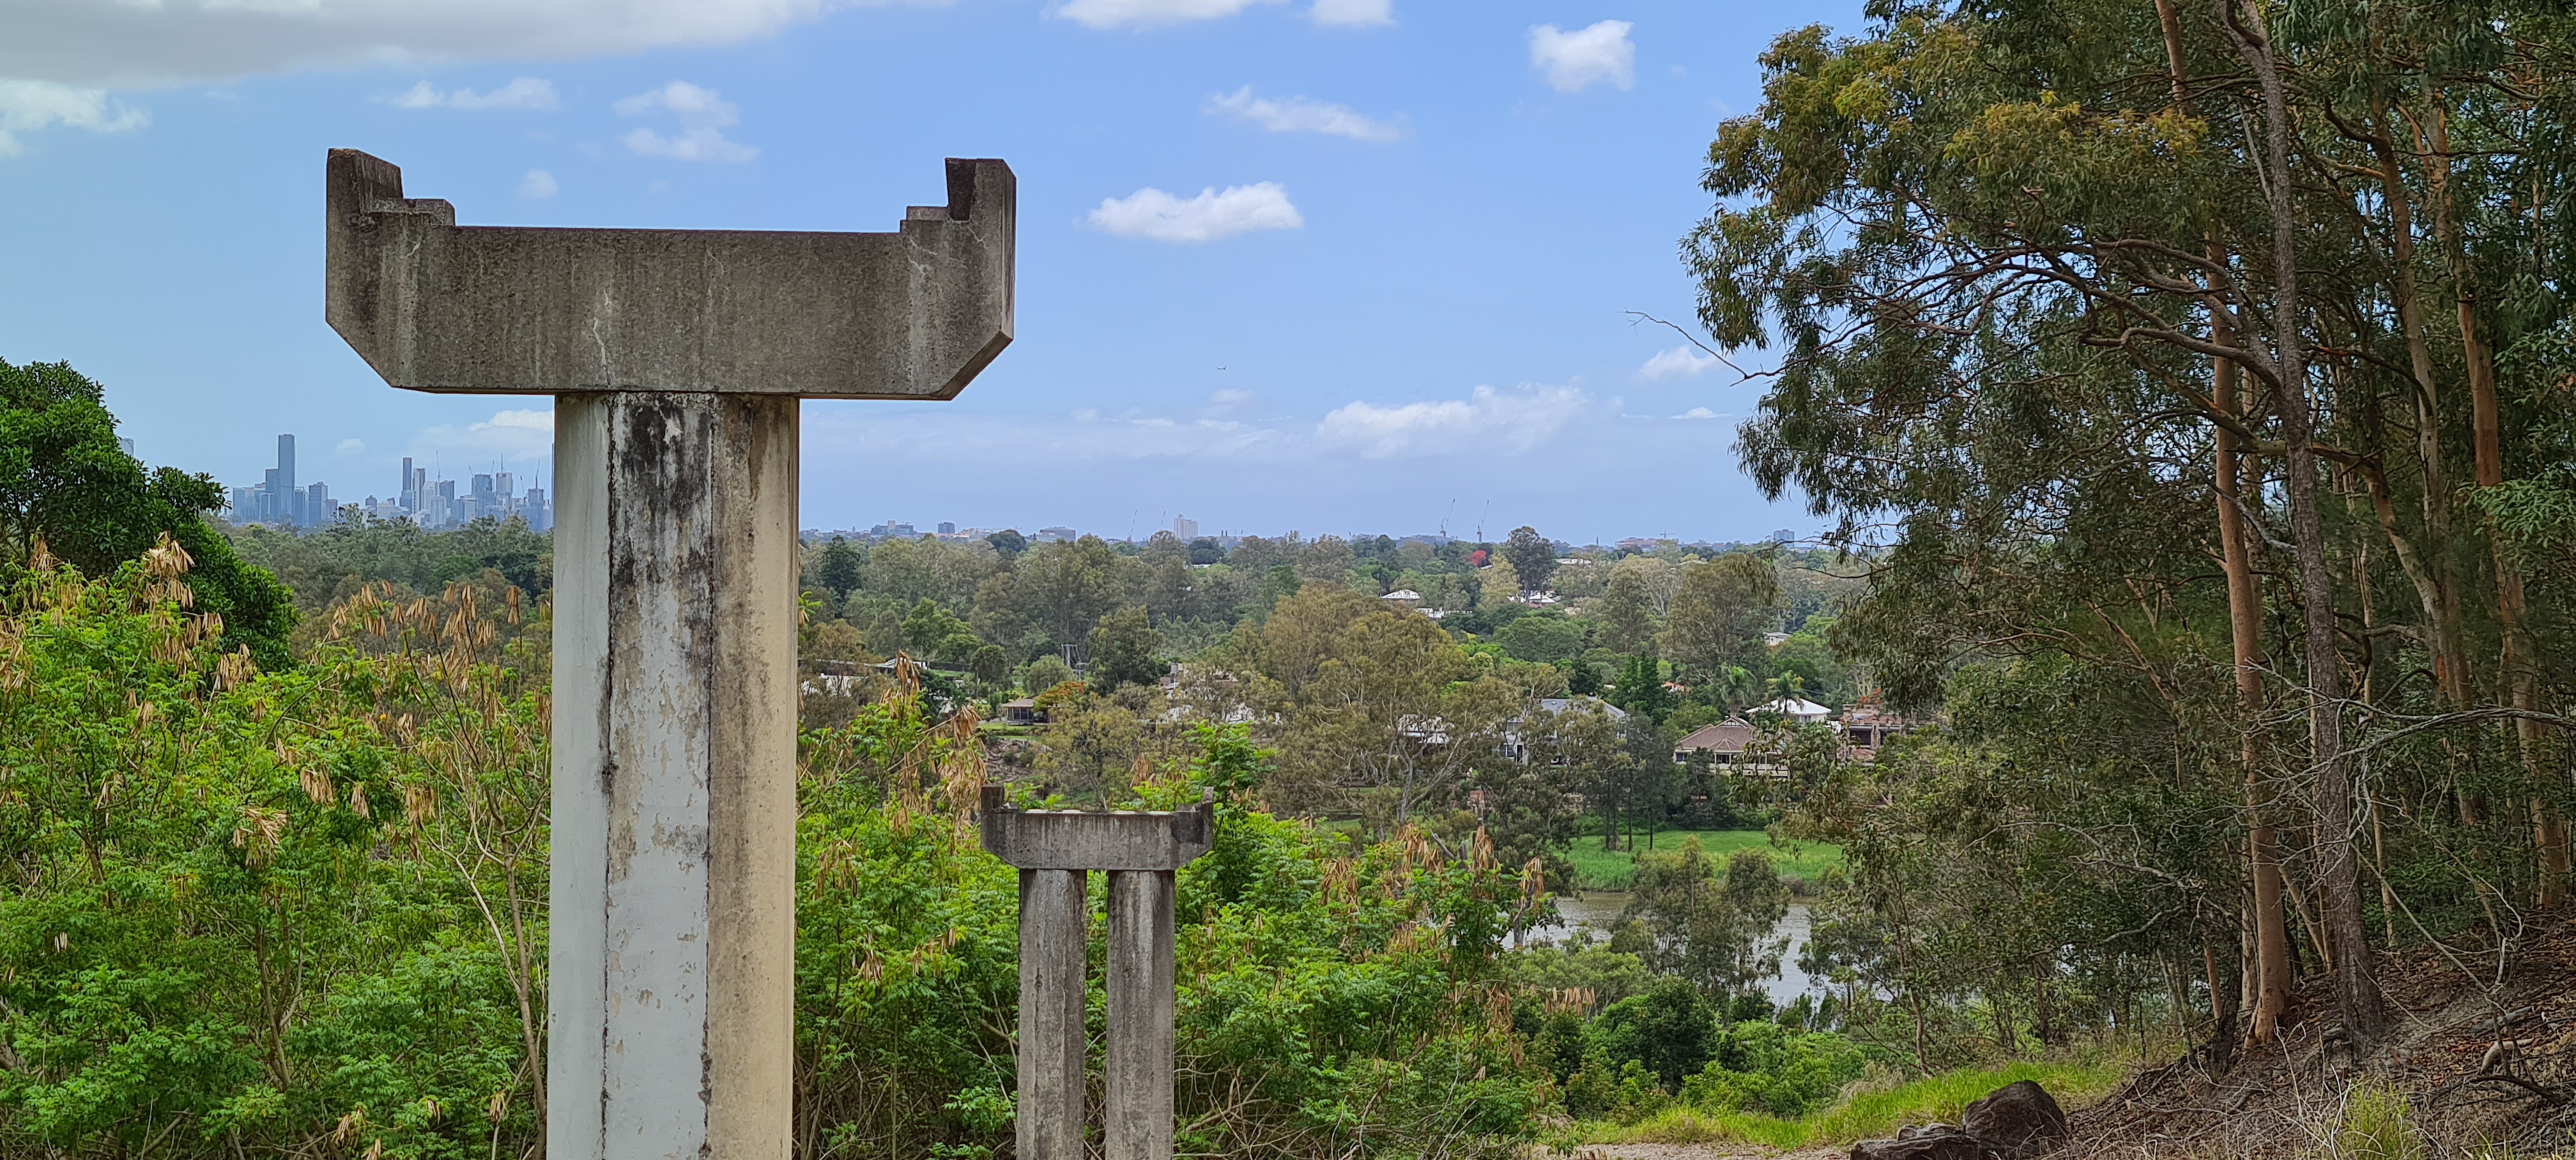 This is an image of concrete conveyor belt supports (remnants) - Queensland Cement and Lime Company conveyor belt remnants (Local heritage place) - viewed from parkland, end of Jennifer Street, Seventeen Mile Rocks (looking east) towards Brisbane River